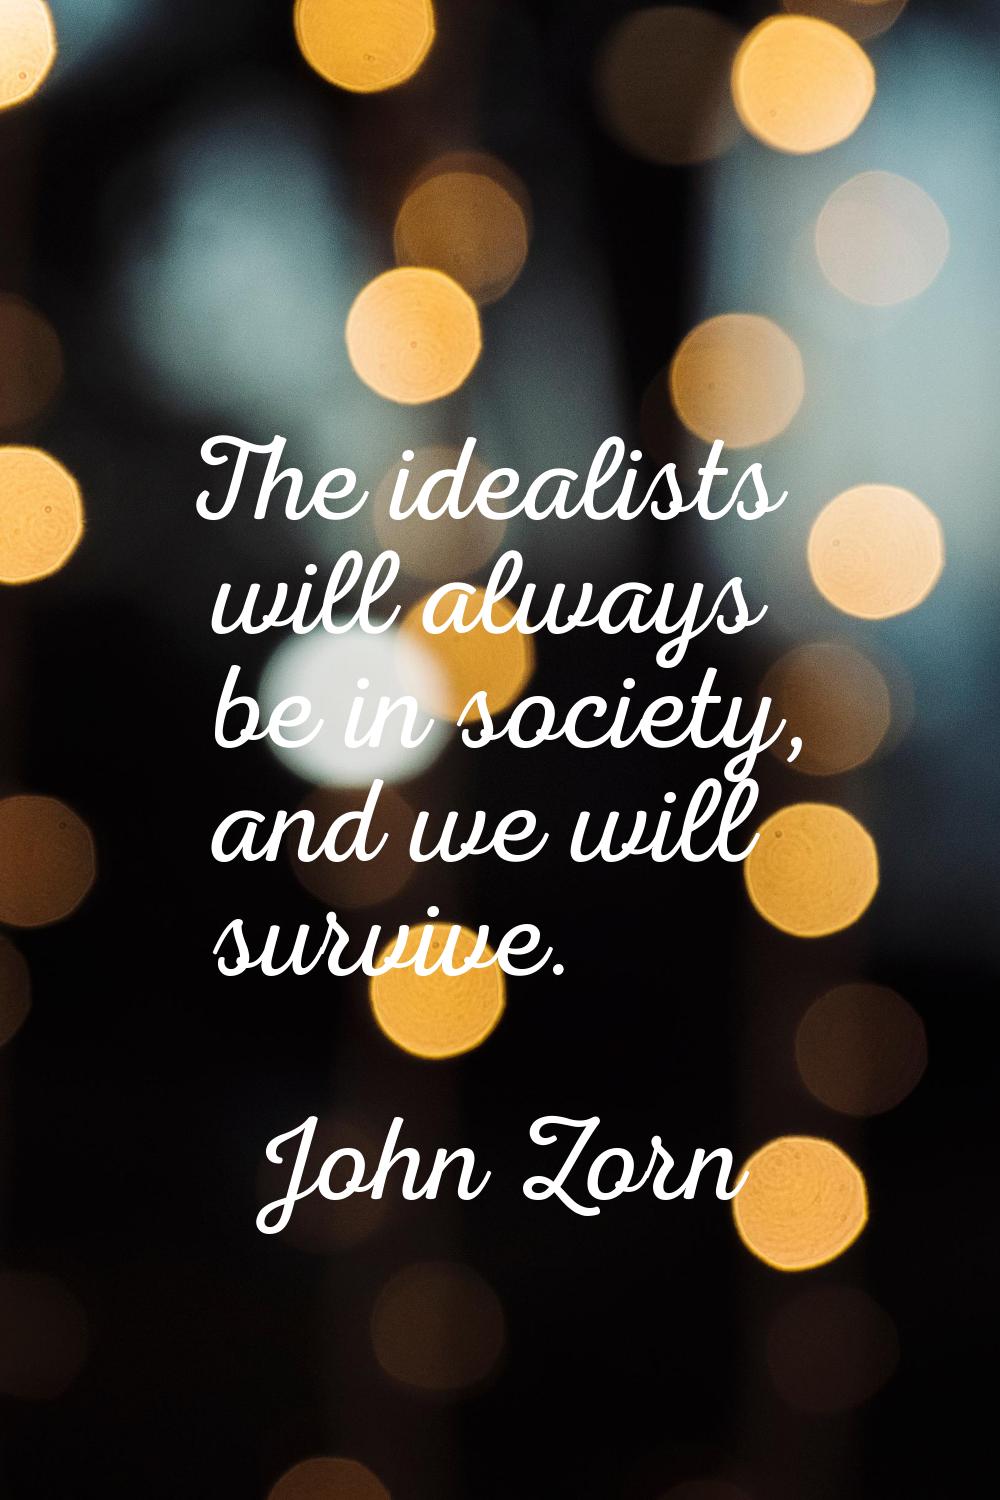 The idealists will always be in society, and we will survive.